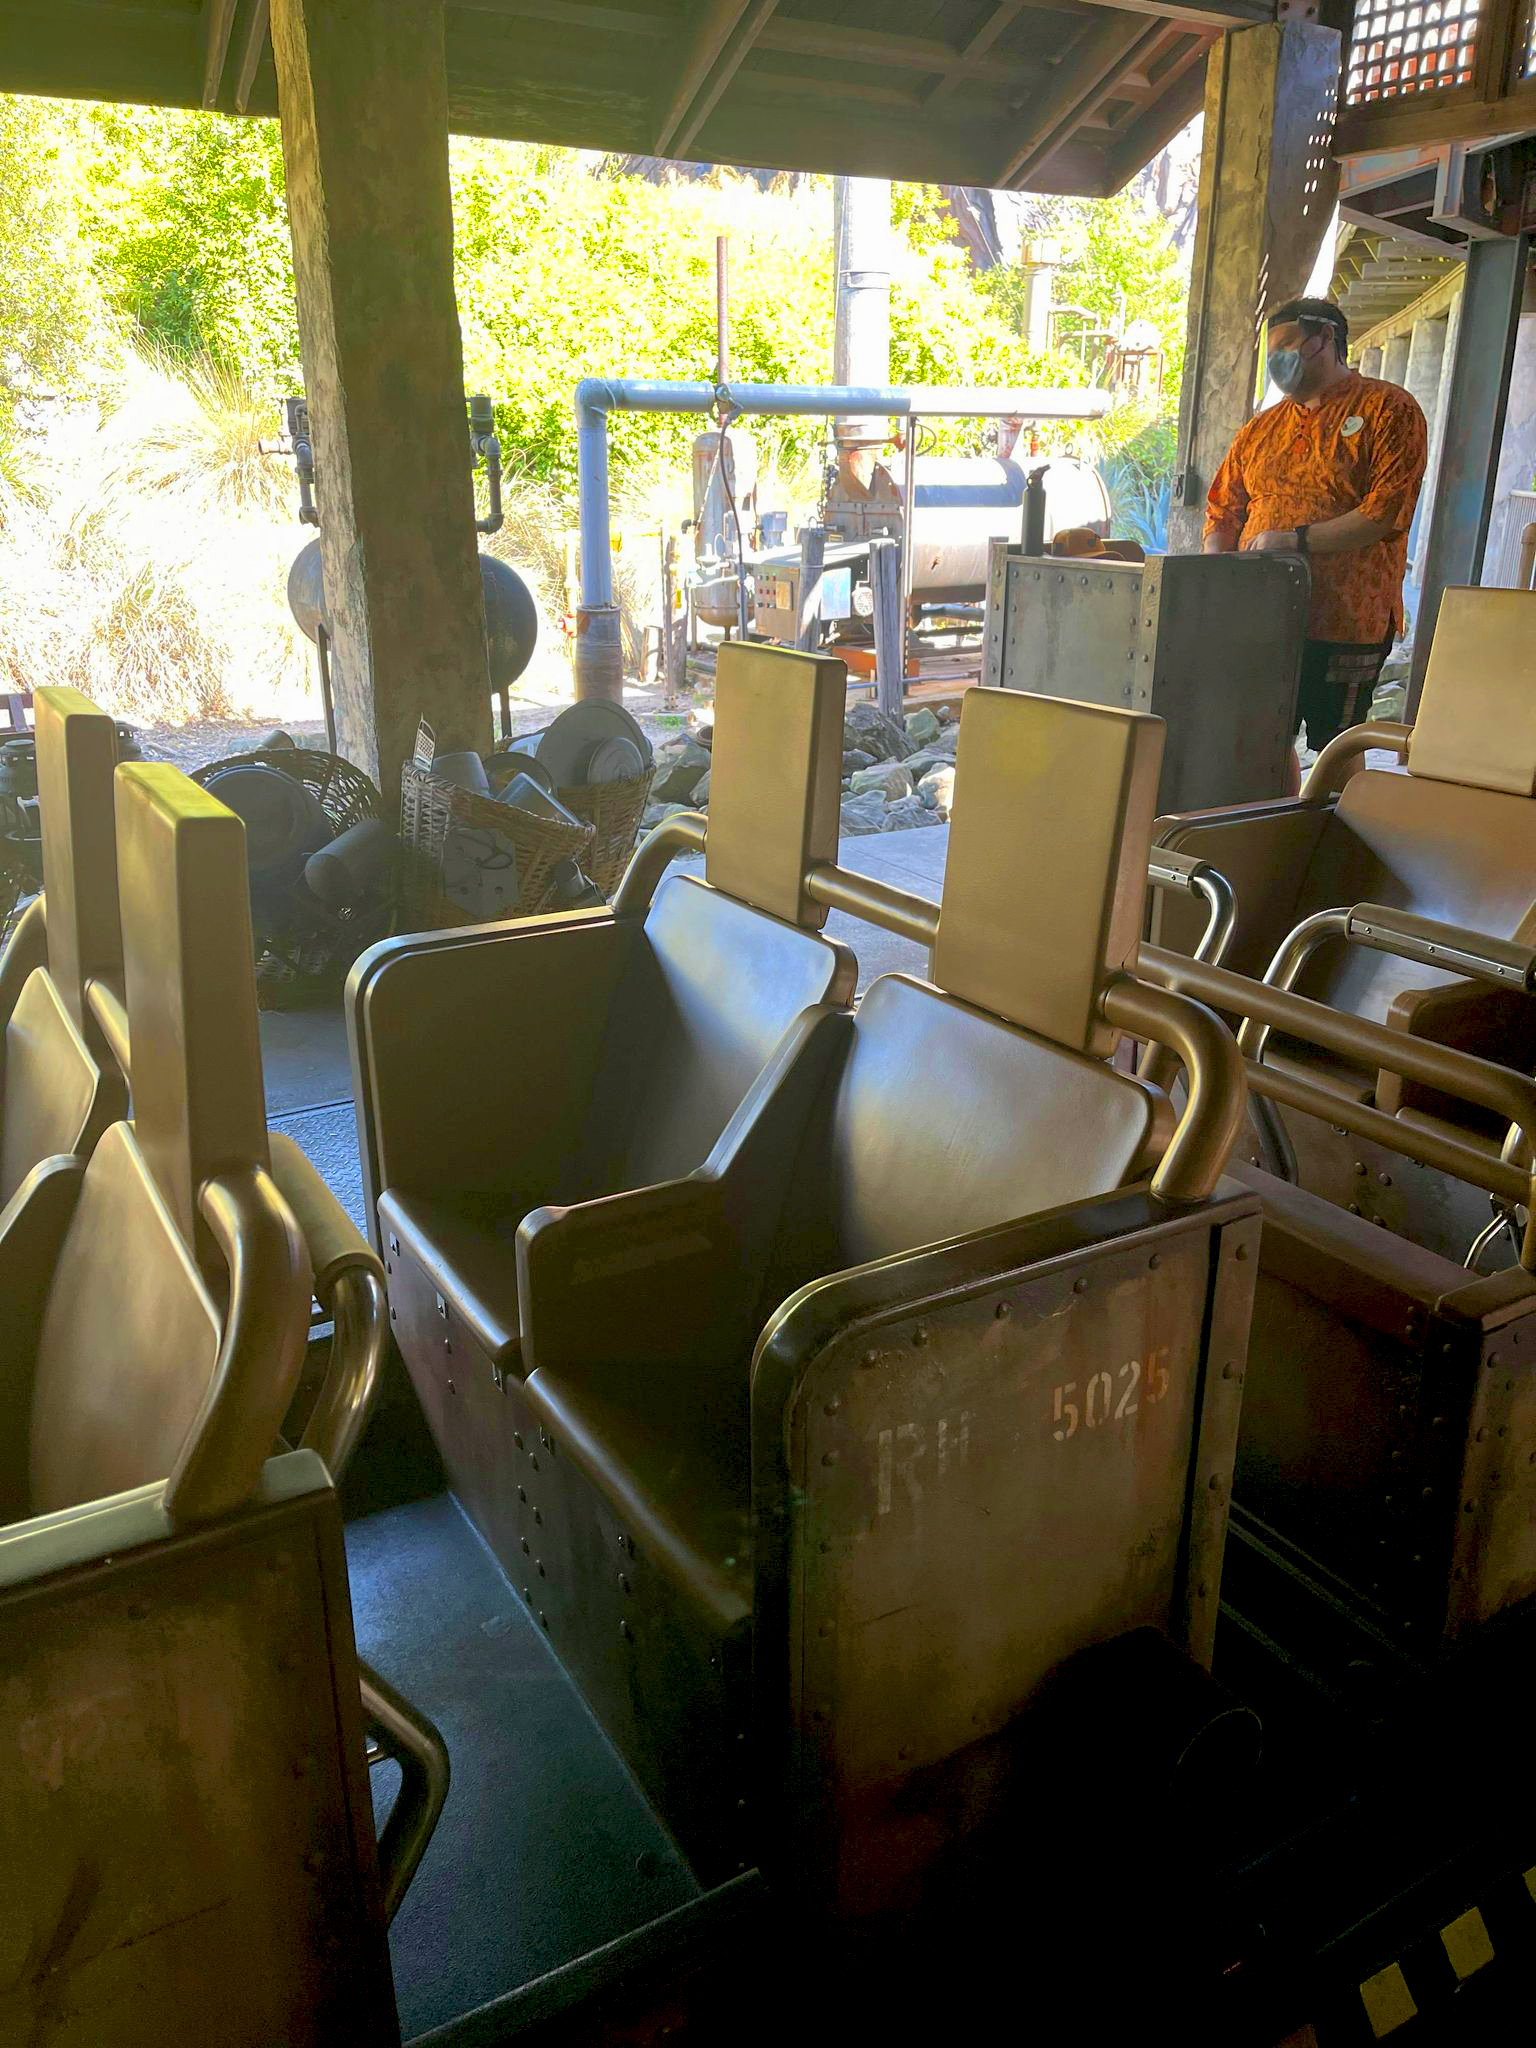 Expedition Everest ride cars